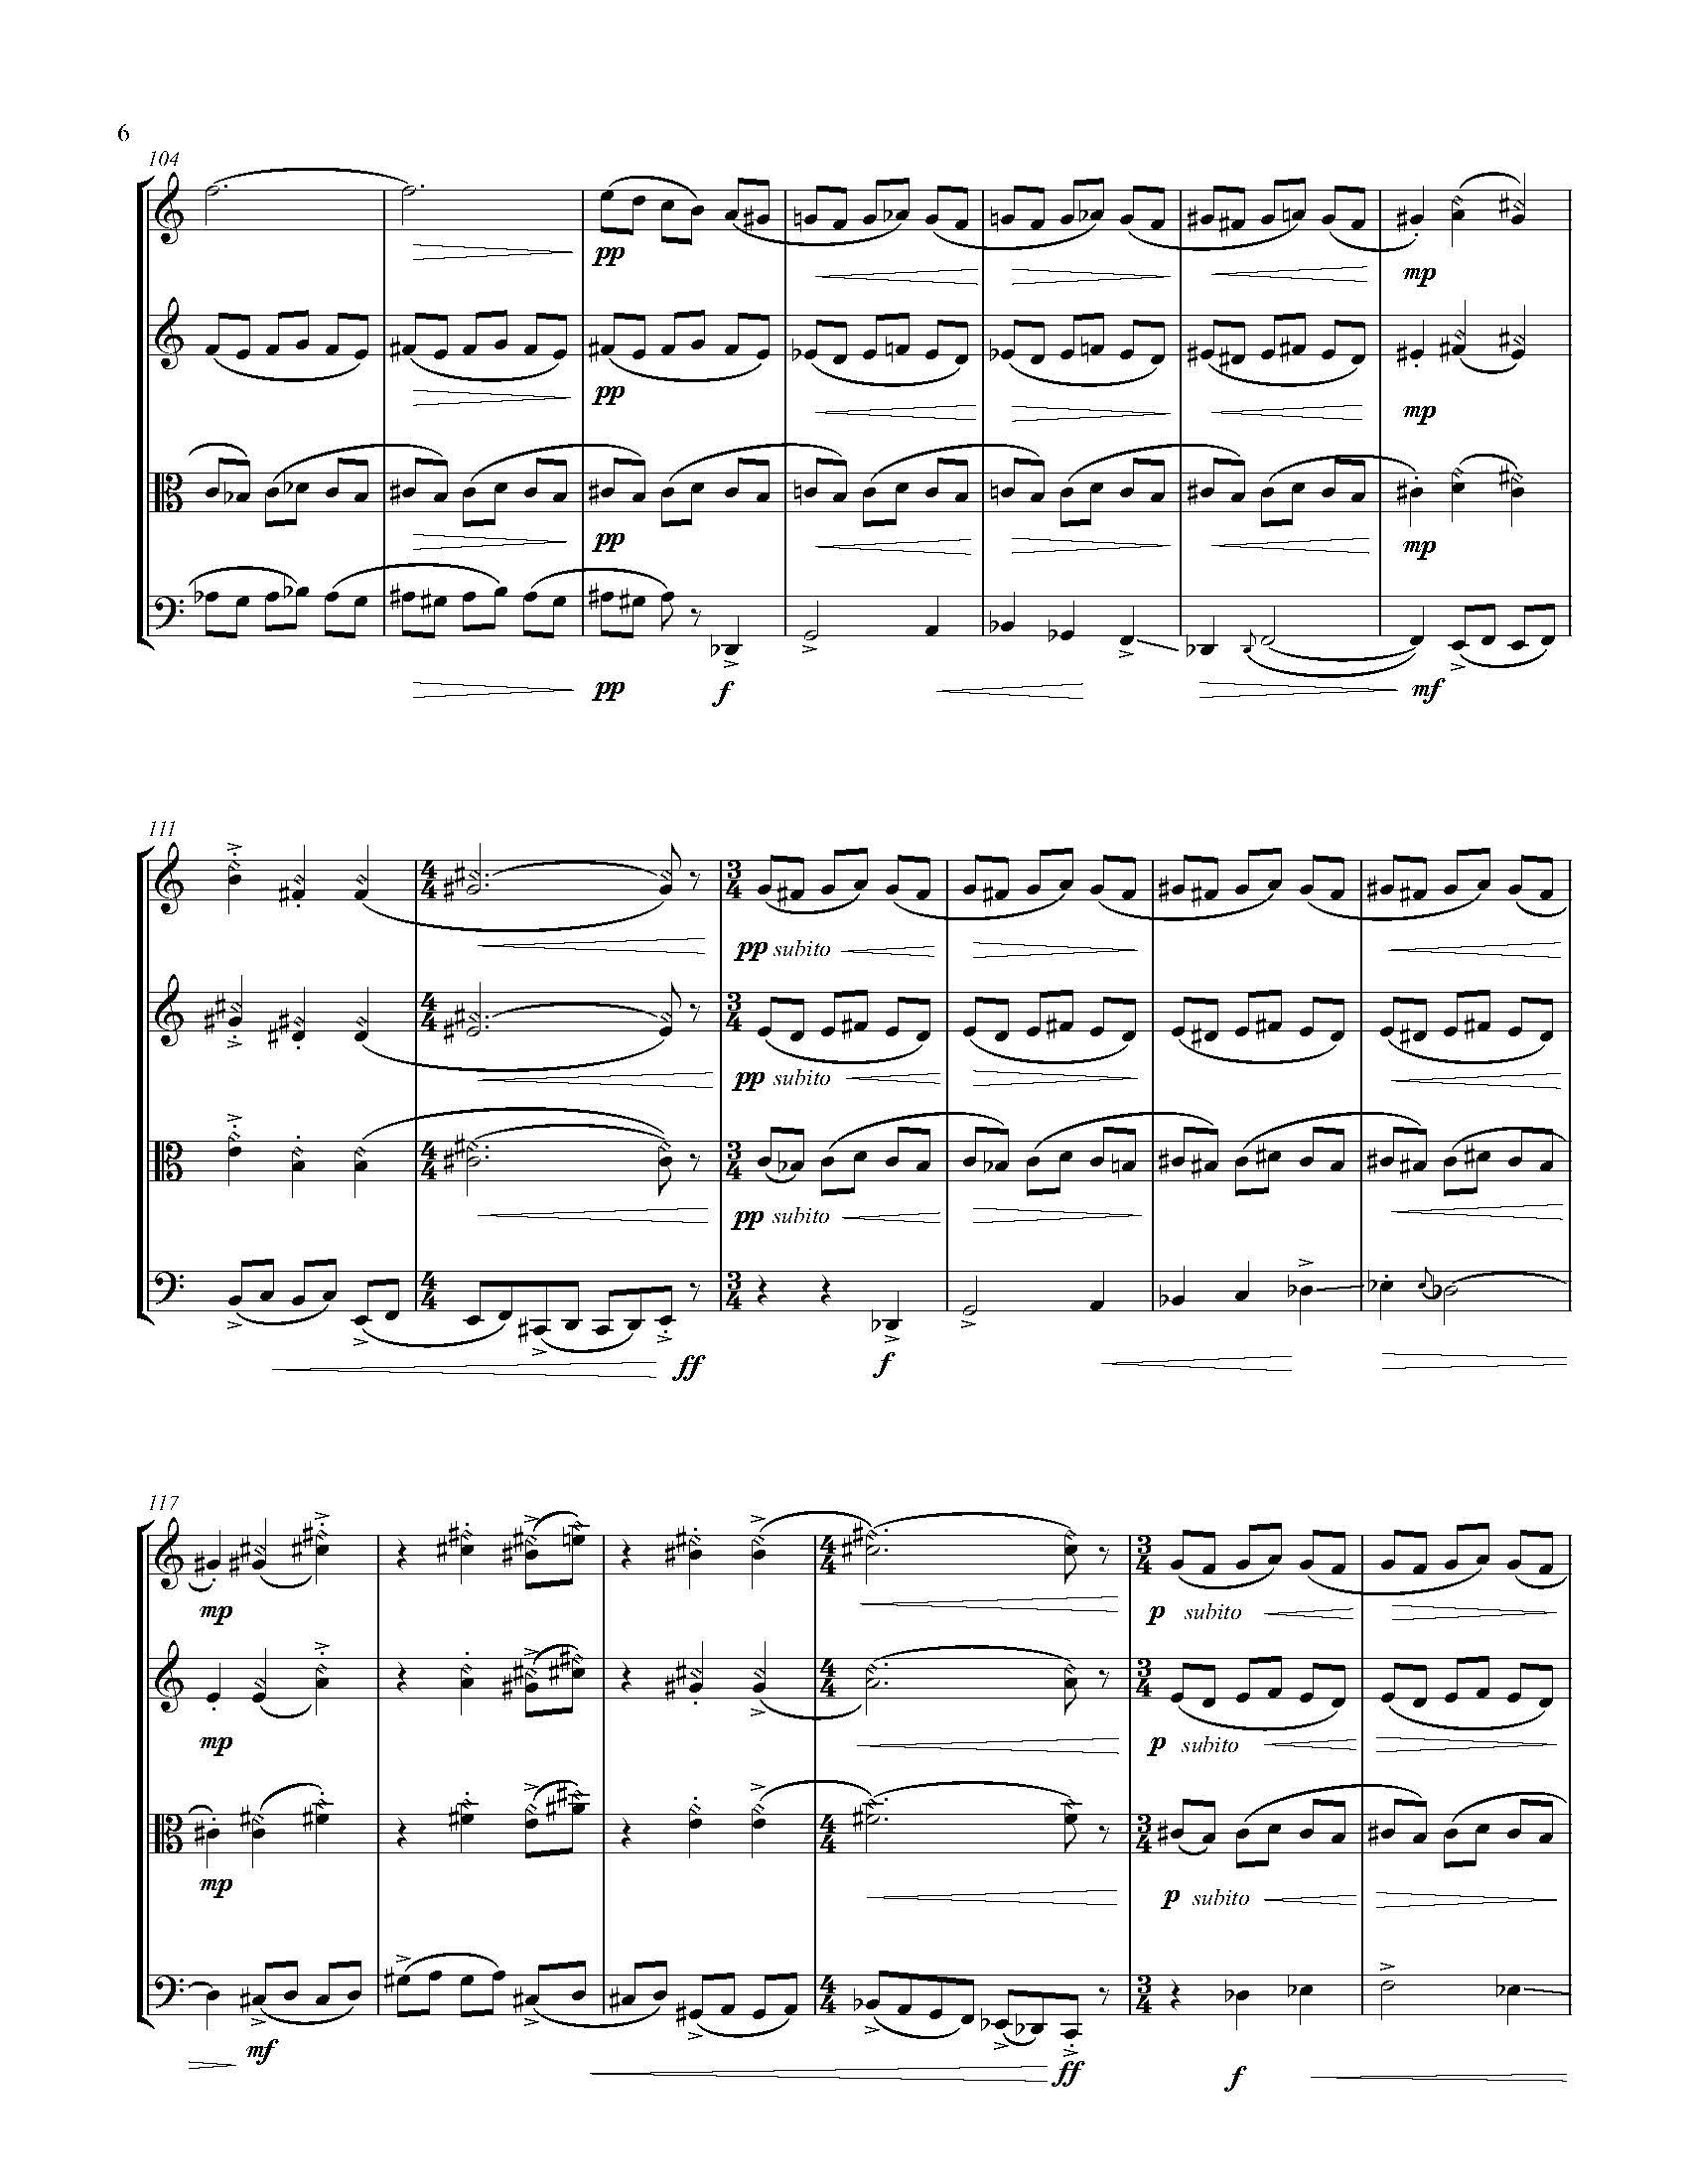 A Country of Vast Designs - Complete Score_Page_12.jpg